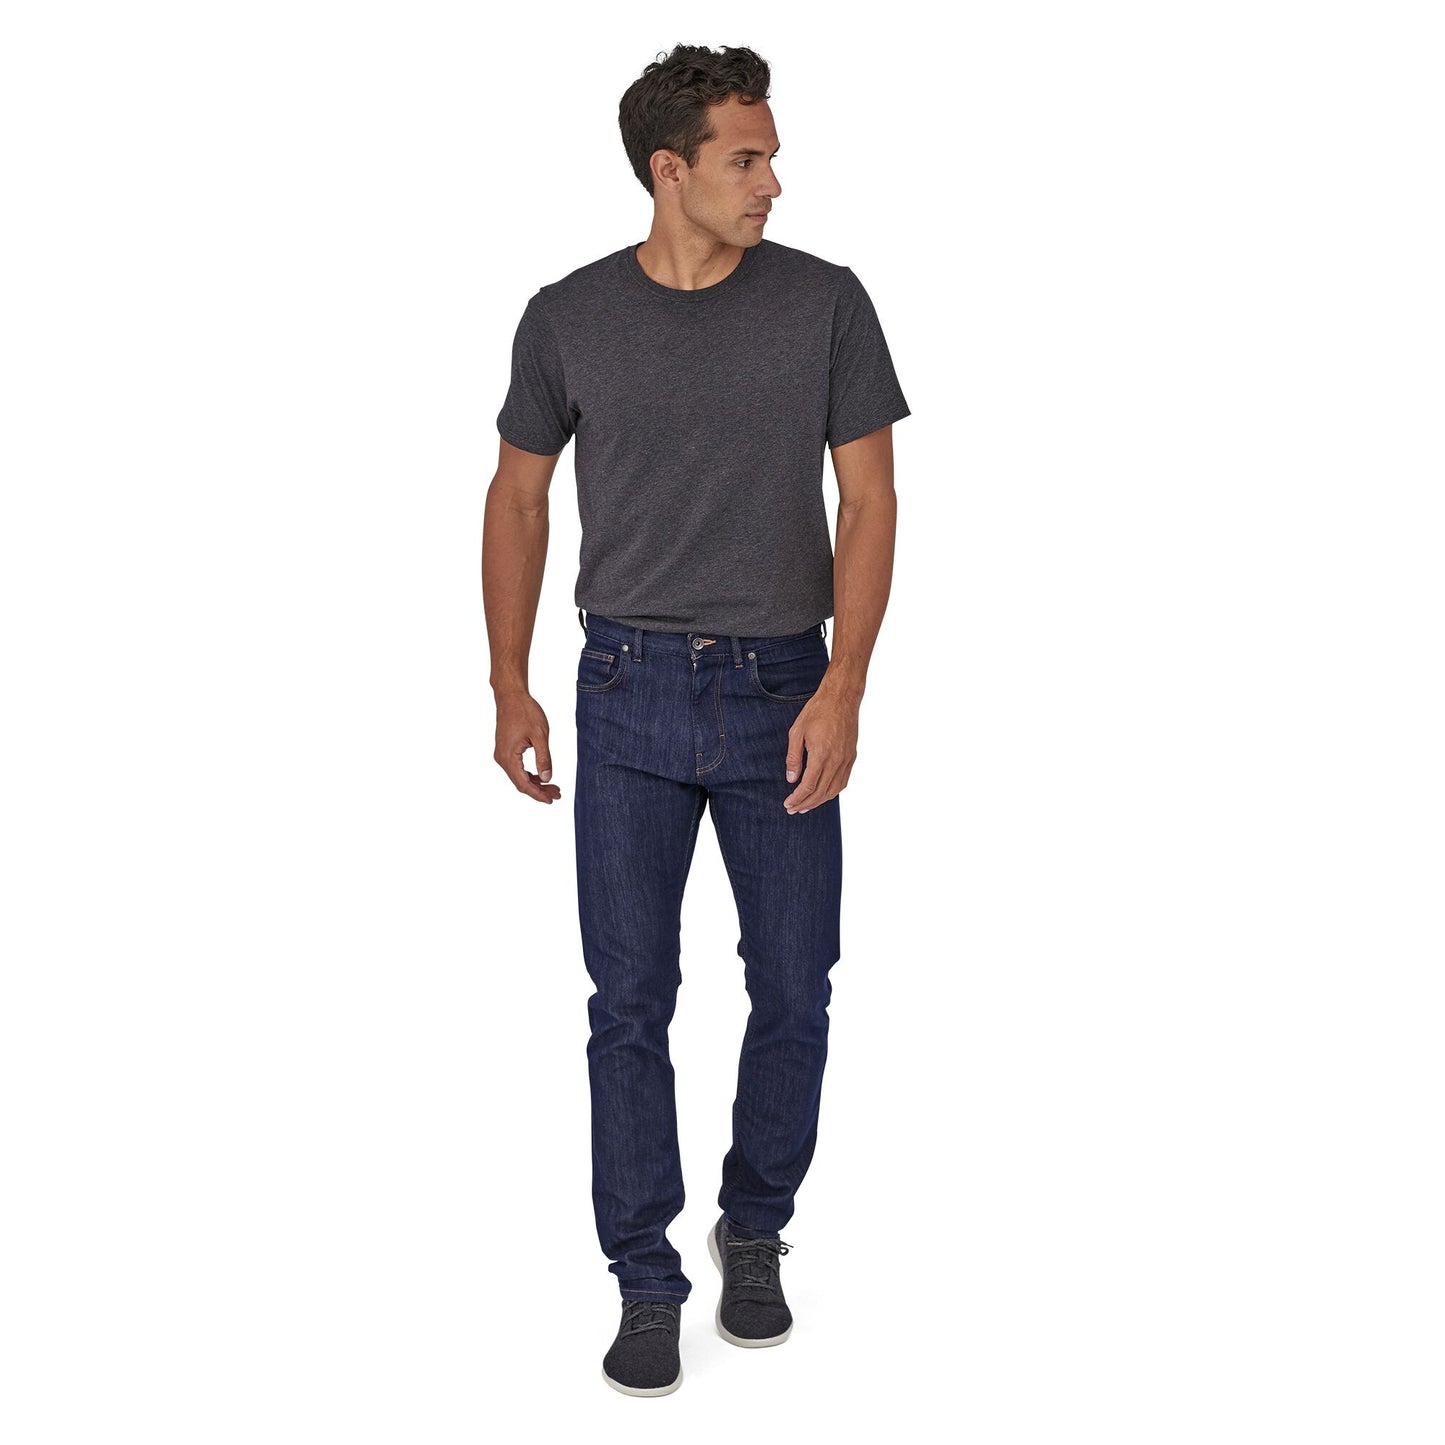 Patagonia Performance Straight Fit Jeans DDNM